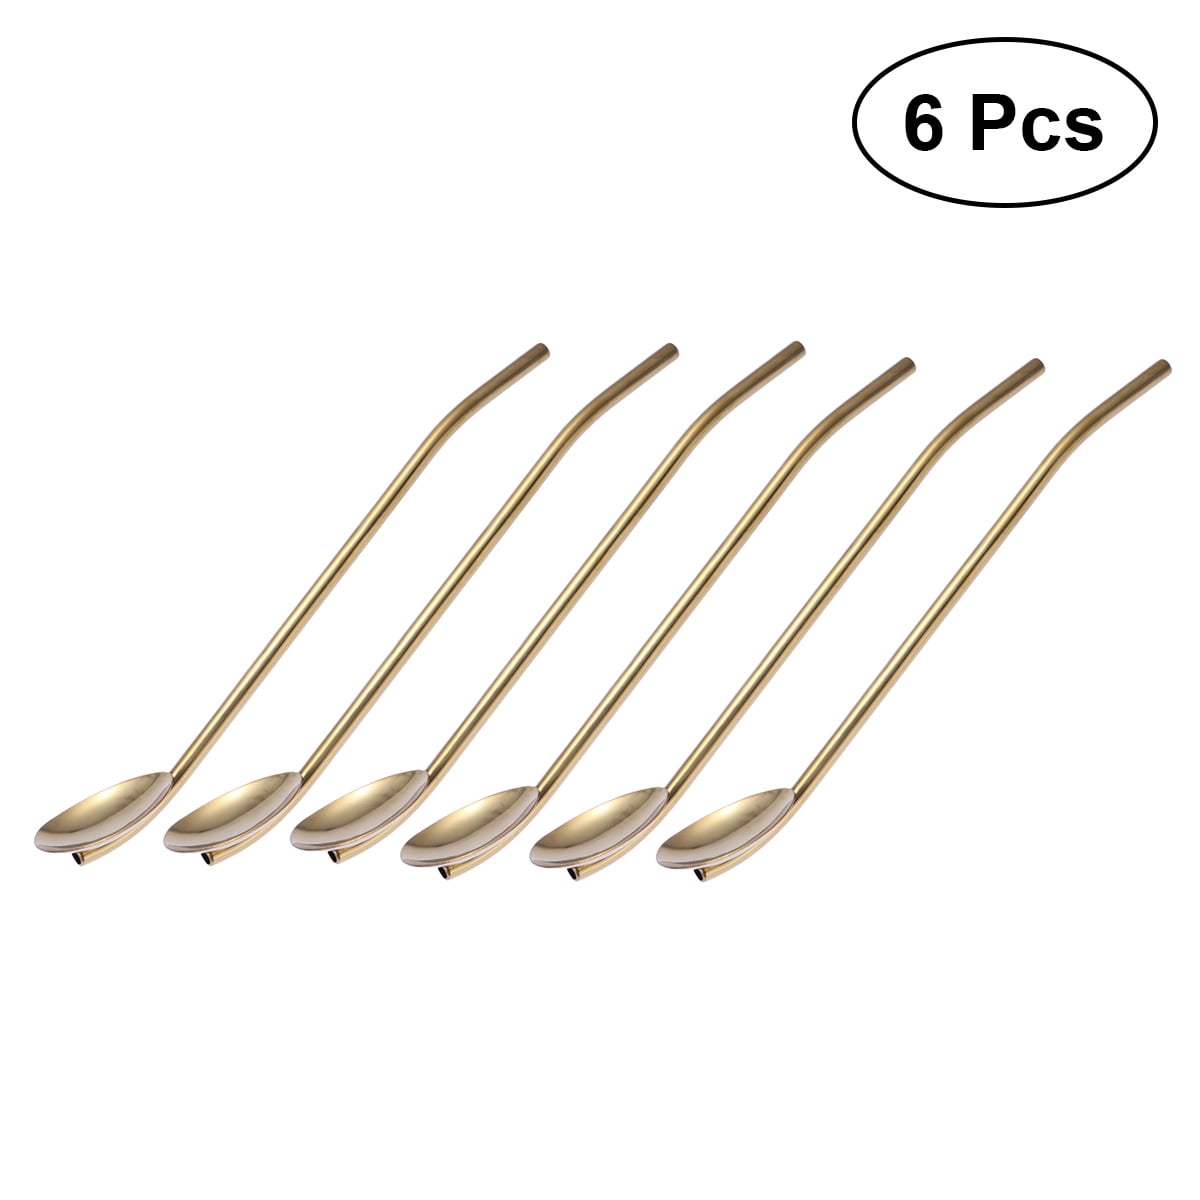 6pcs Stainless Steel Oval Shape Metal Drinking Spoon Straw Straws For Cocktail 